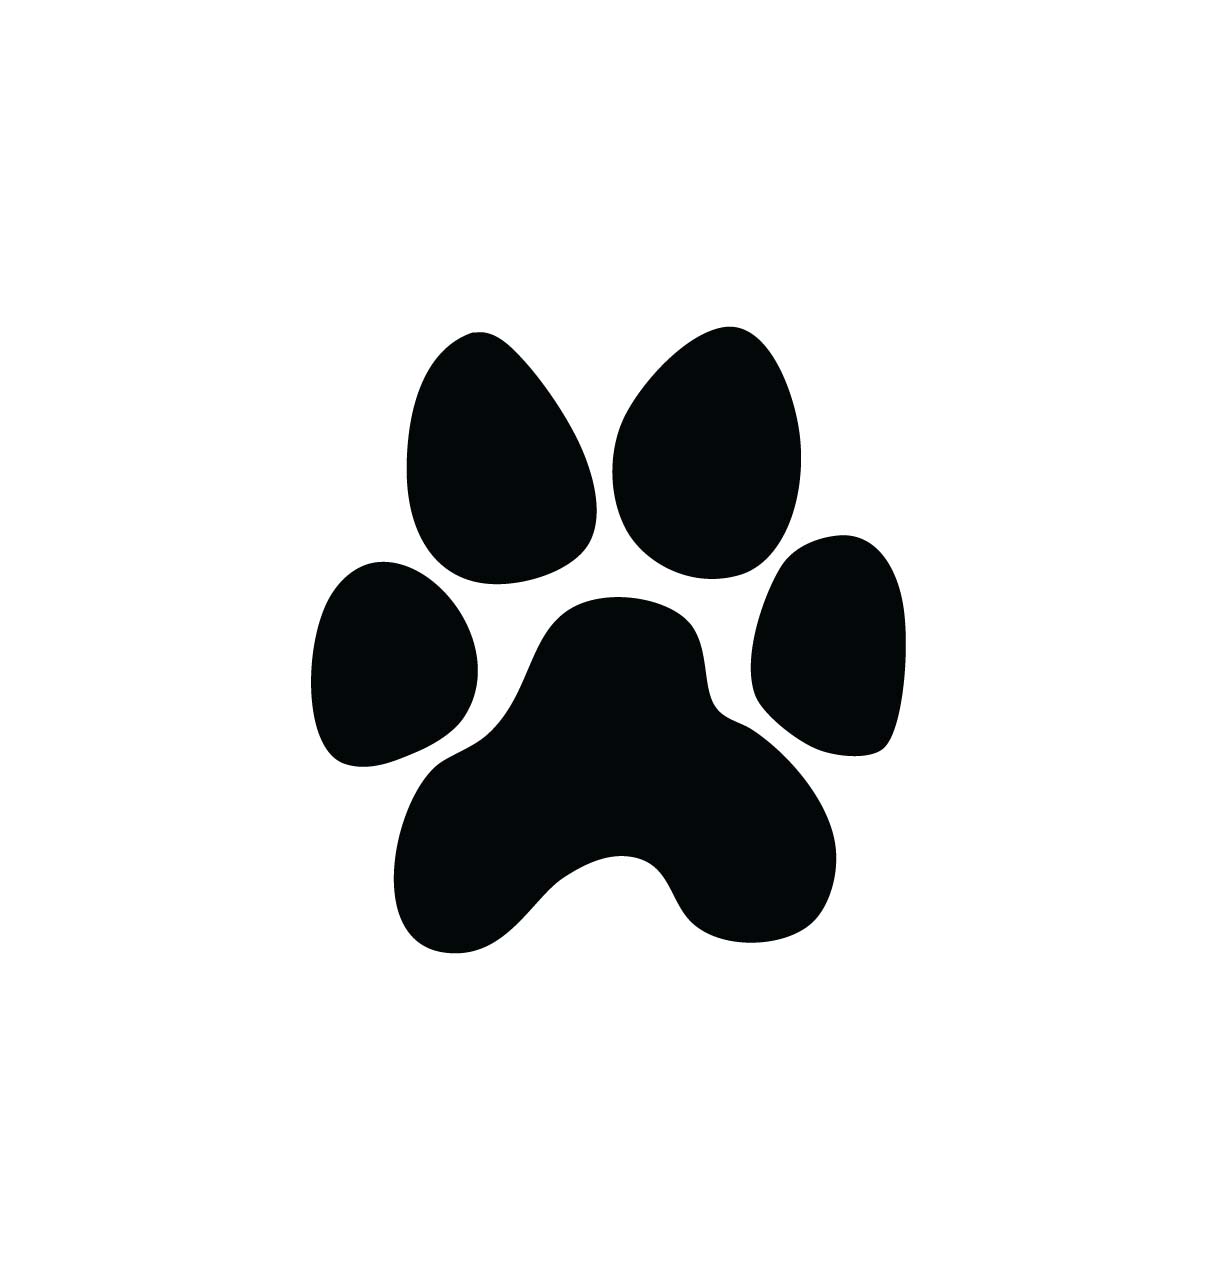 Paw print wildcats on dog paws paw tattoos and clip art image 3 ...